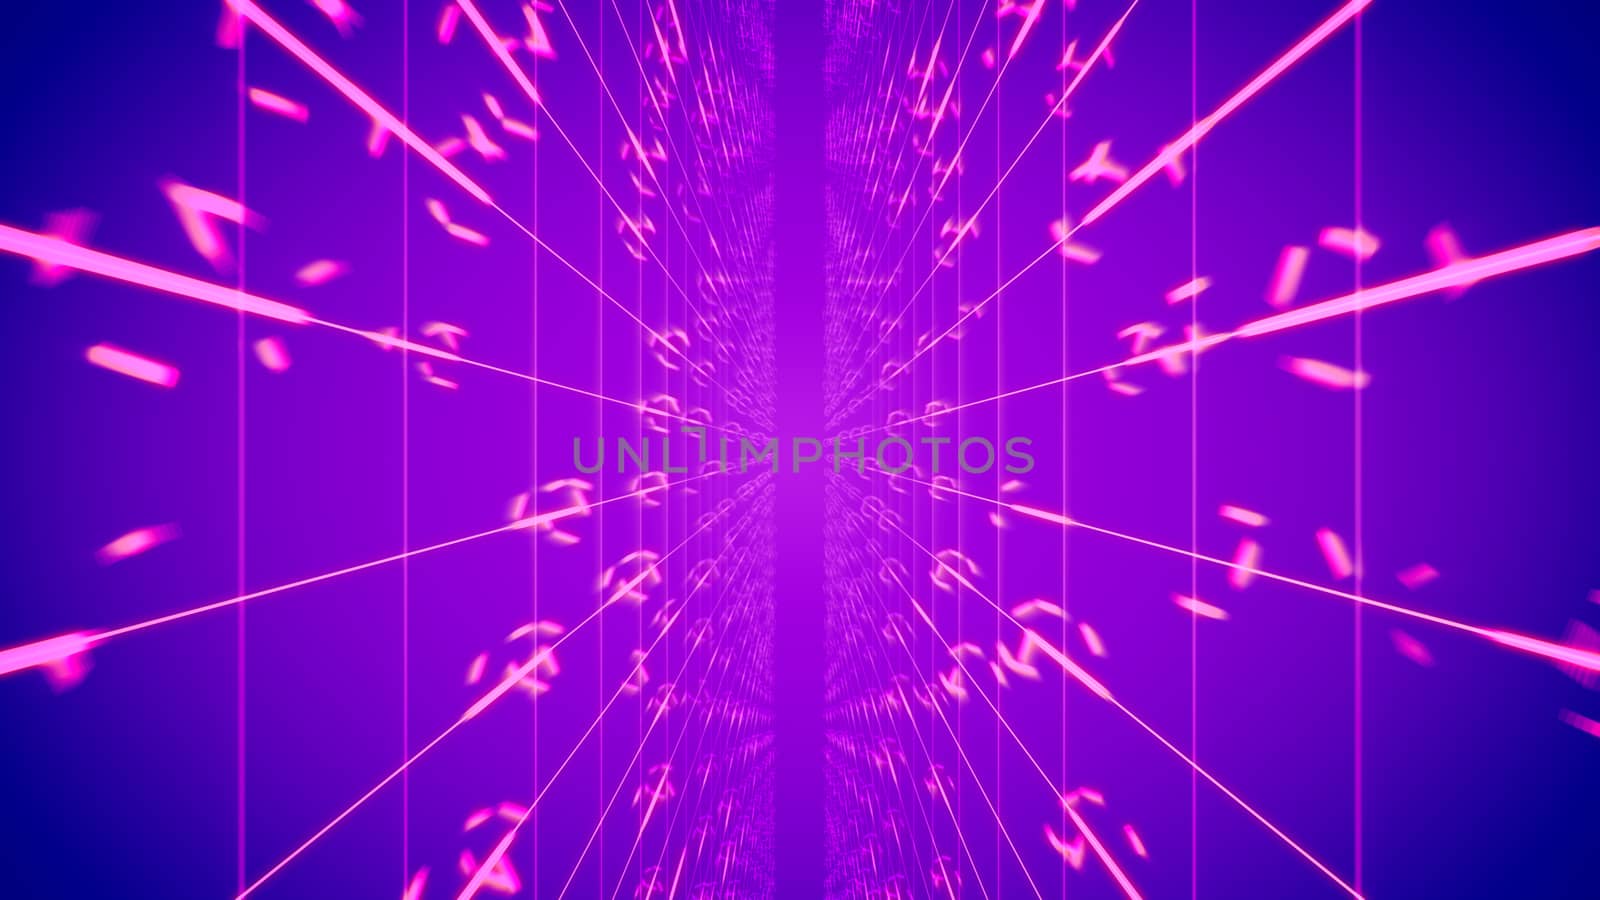 Innovative 3d illustration of time portal from two inclined surfaces with square pink meshes and rotating circles in the light violet backdrop. It creates the mood of mobility